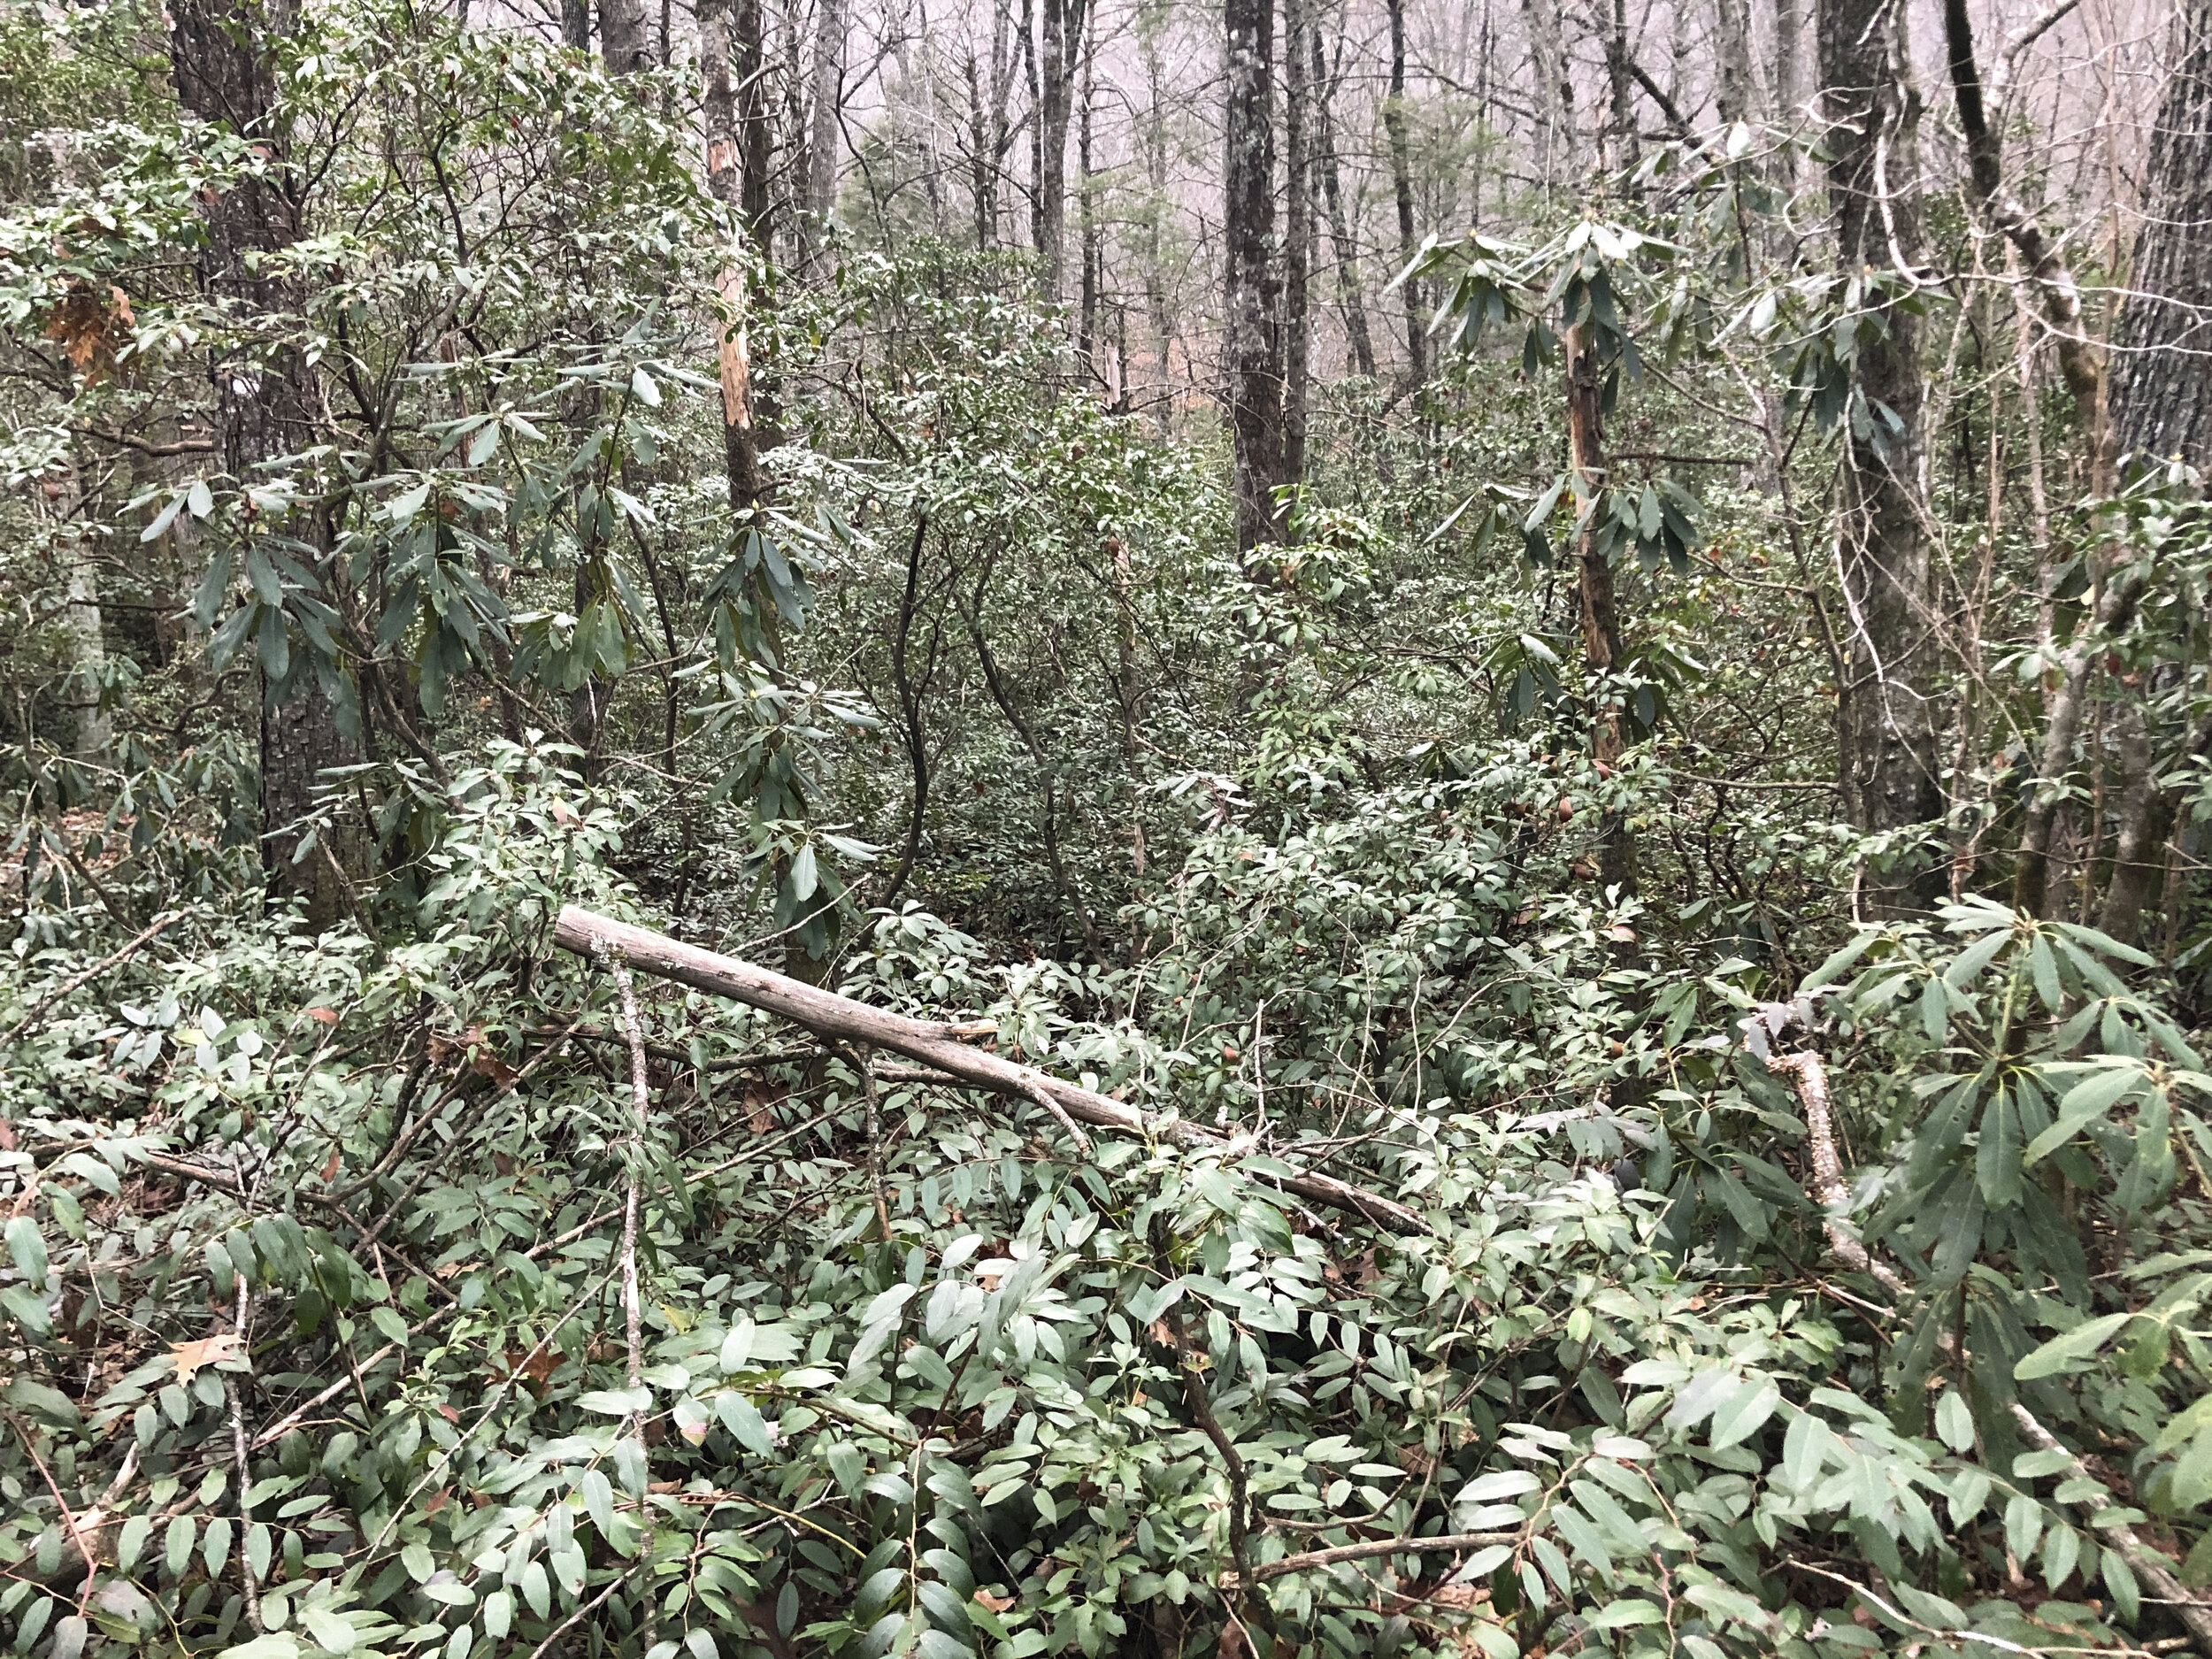  The almost impenetrable understory of rhododendron, mountain laurel, leucothoe and azaleas in North Carolina along the parkway 